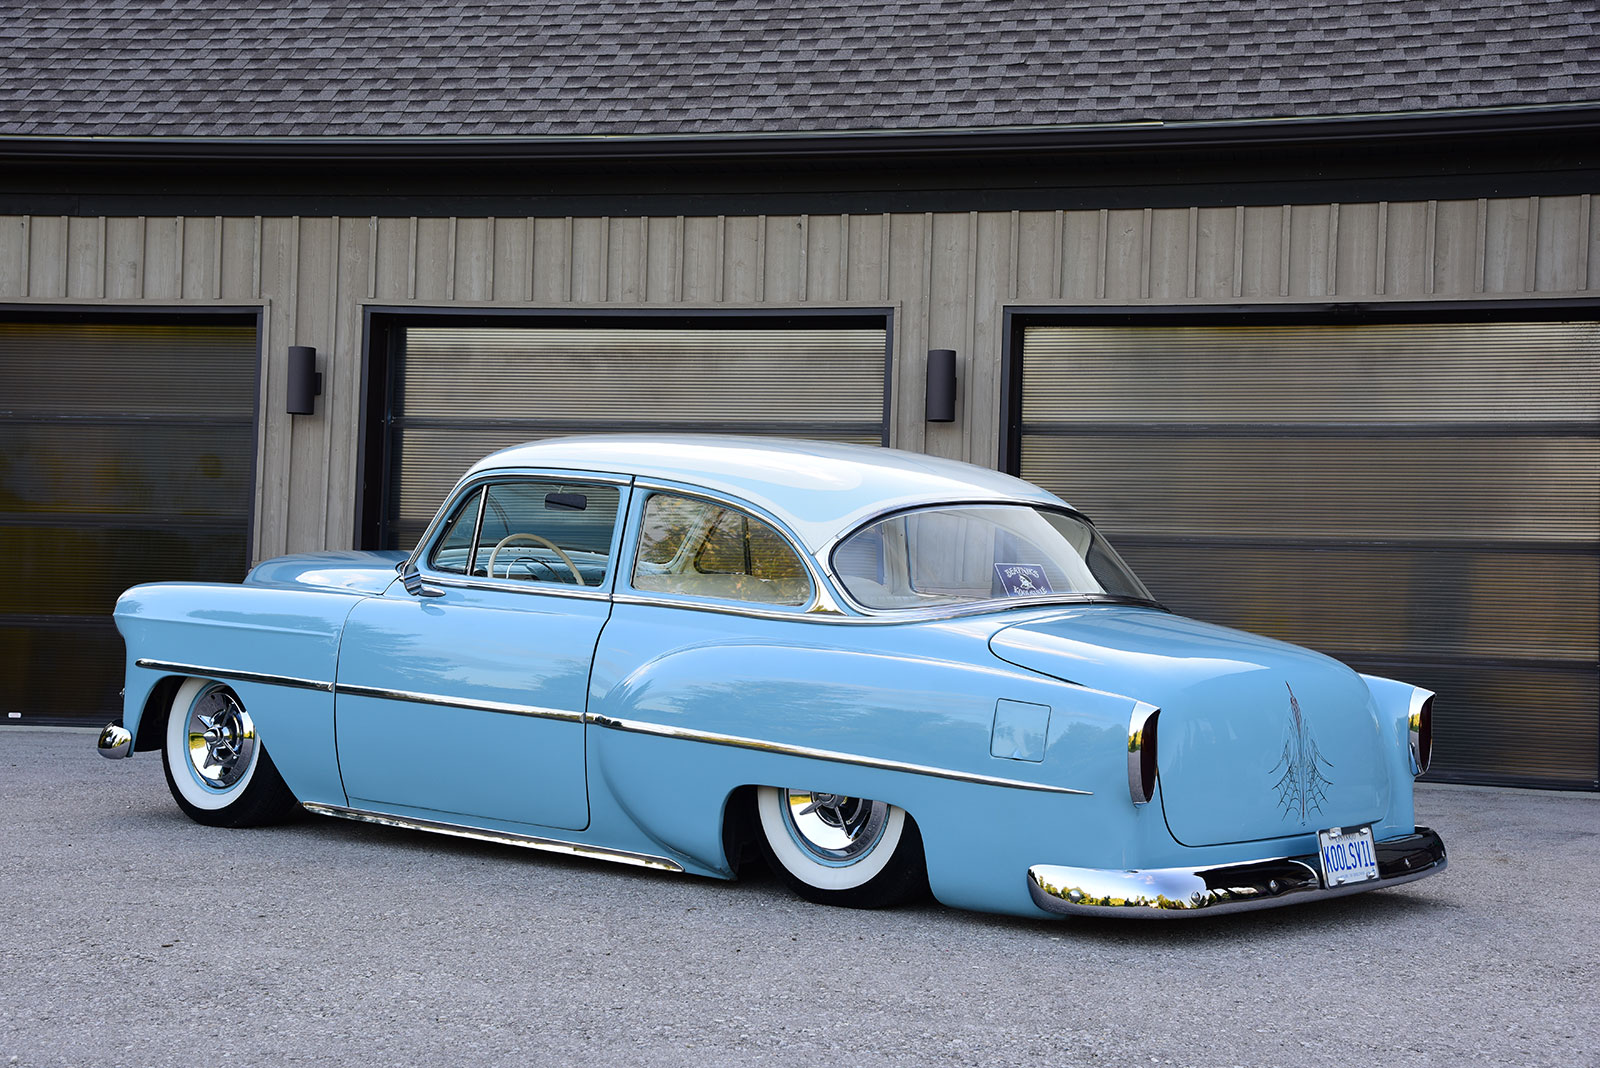 04 15x6 steel wheels with Coker Classic radial wide whitewalls on the Chevy 210